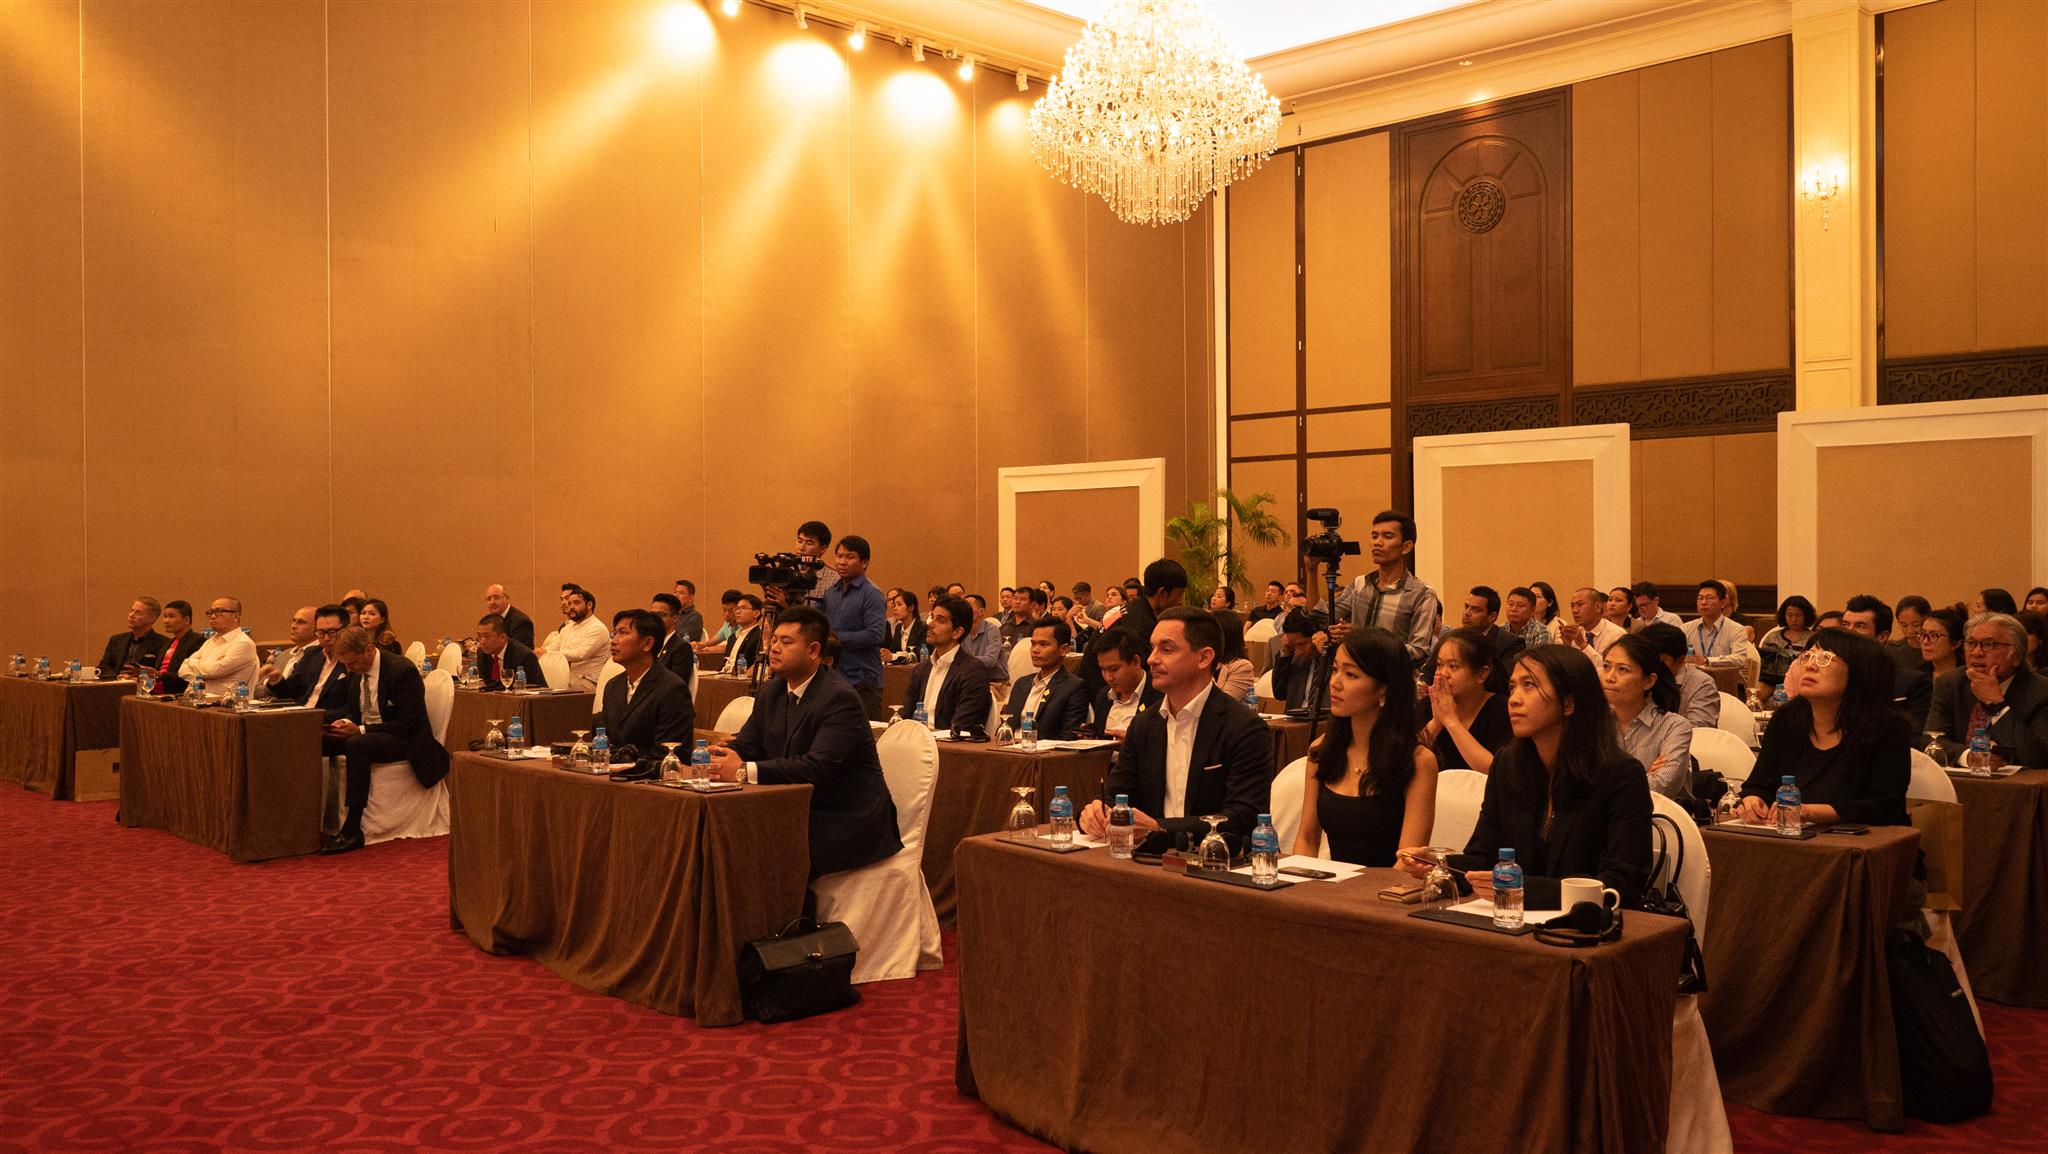 Savills Hotels Asia Pacific successfully hosts seminar on “Emerging Trends and Future of Cambodia’s Hospitality Industry”